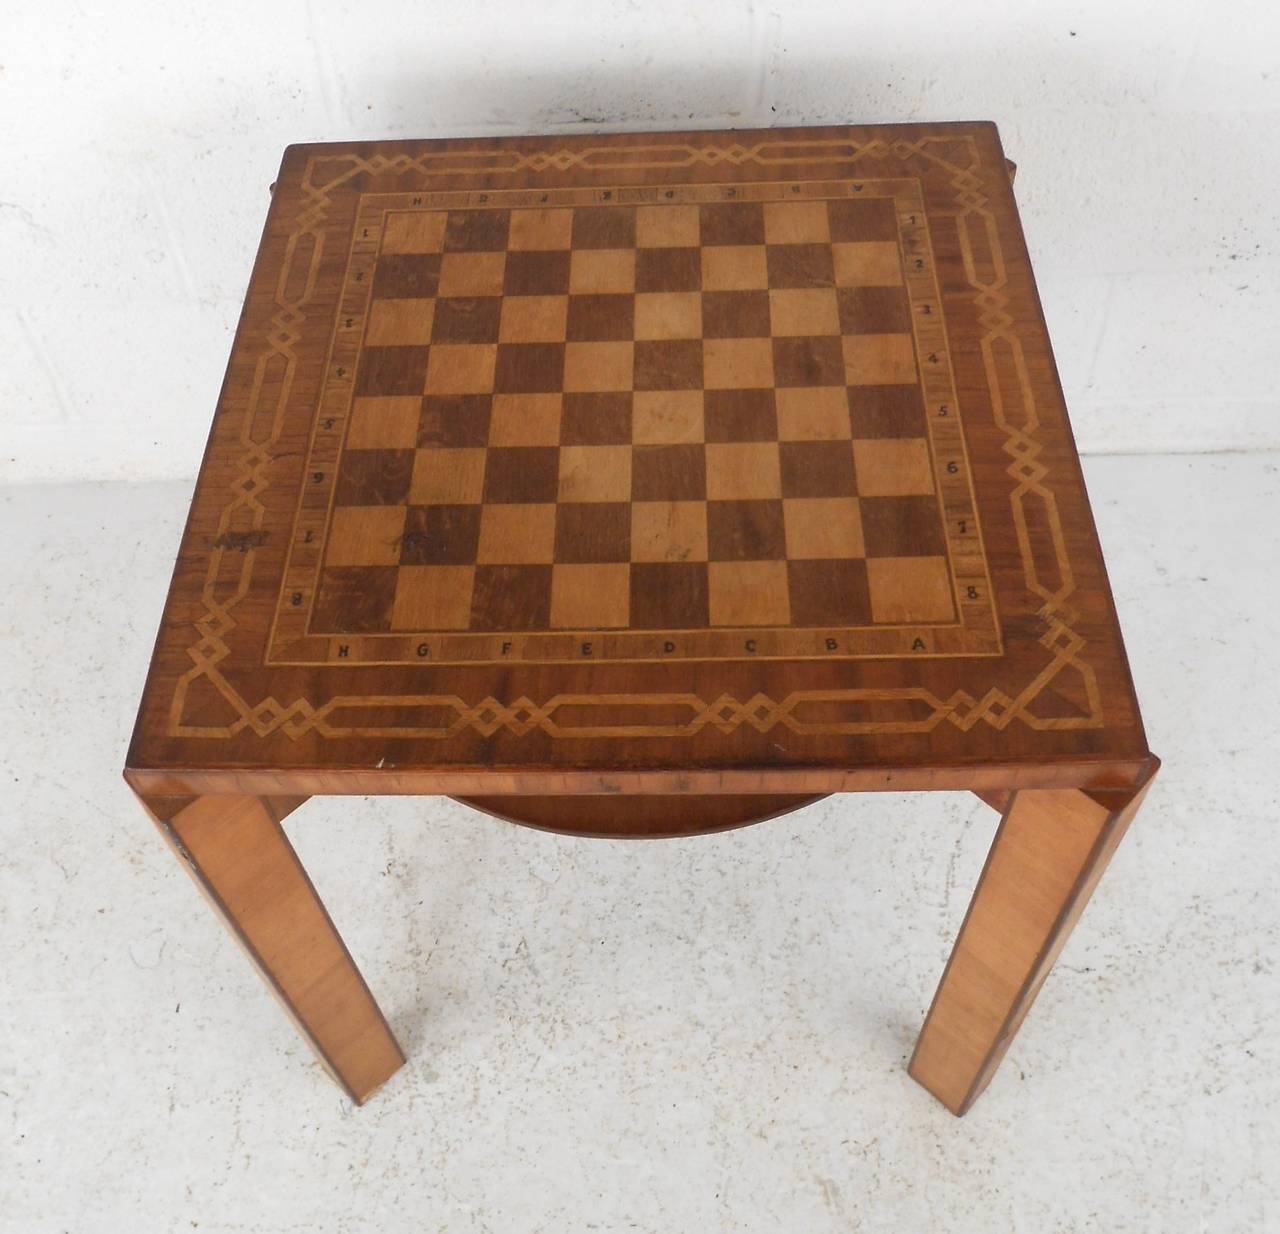 This vintage table features a mixture of hardwood complete with decorative inlay to make for a rustic and unique chess table. With secondary shelf for storage, this piece is perfect for decor or gaming. Please confirm item location (NY or NJ).